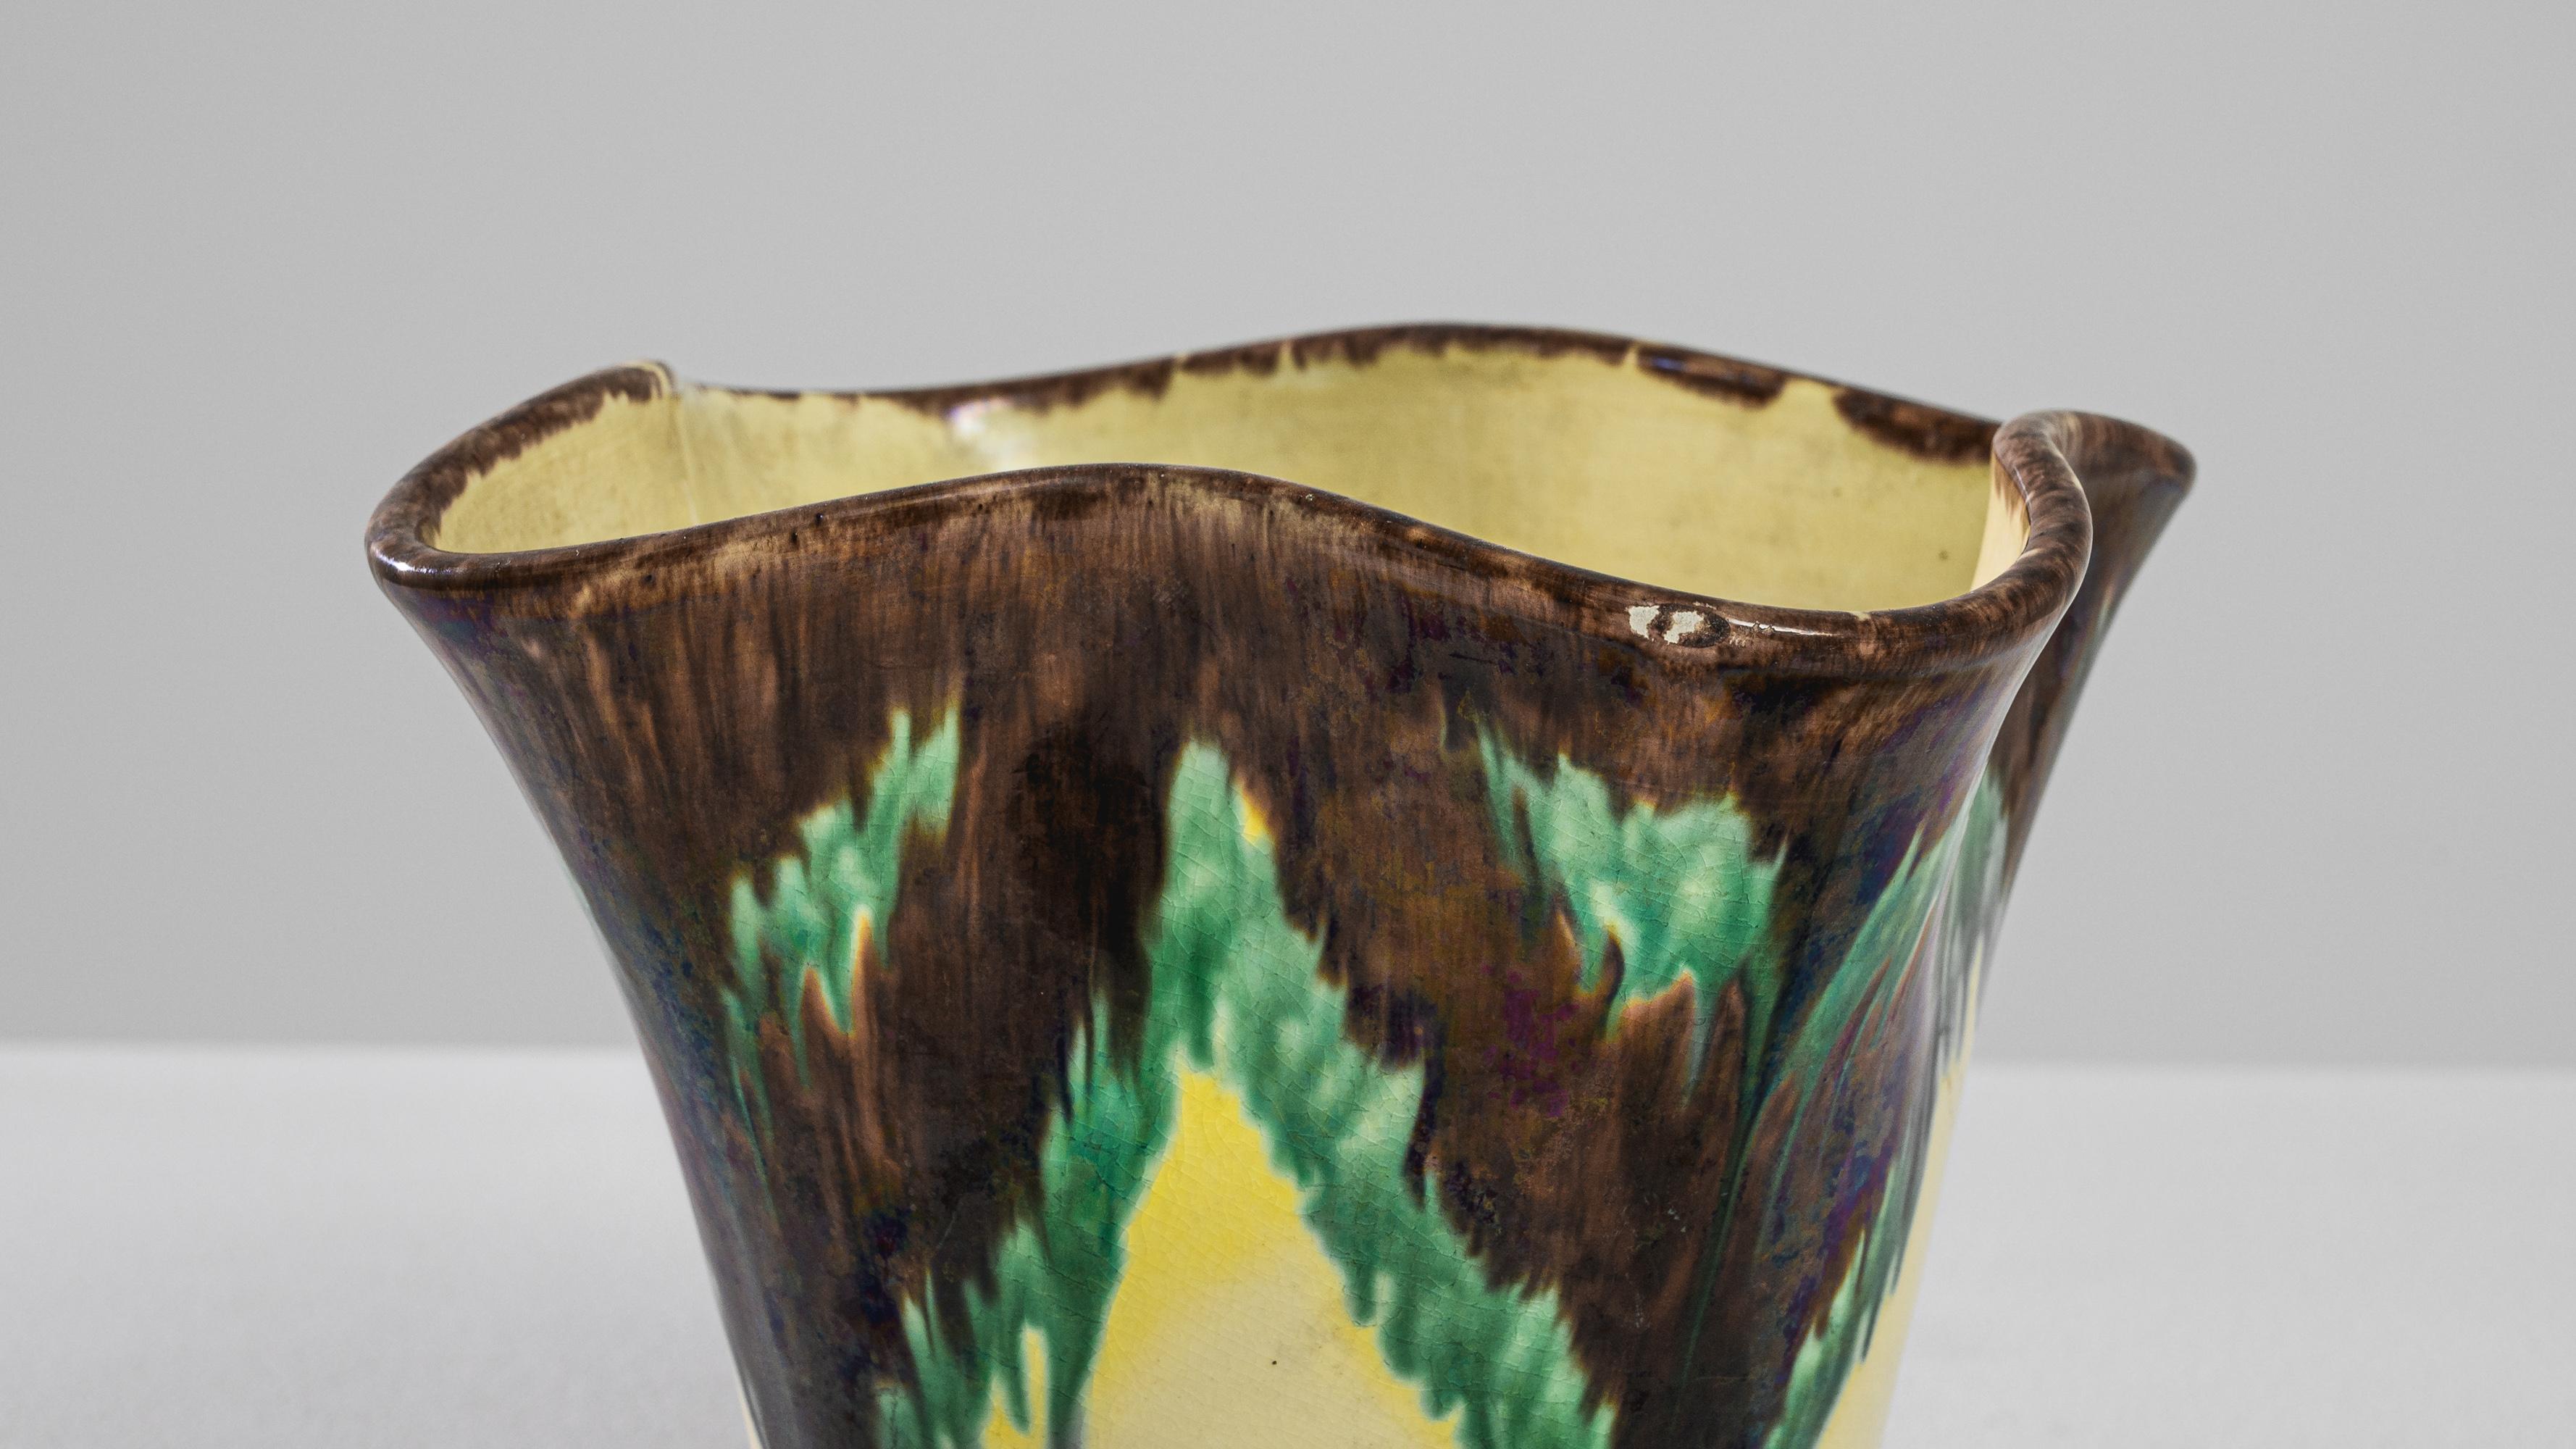 This 1920s Belgian Ceramic Planter is a remarkable relic of the Art Deco era, notable for its geometric shape and contrasting color palette. Crafted from quality ceramics, it features a striking flared rim that adds an element of drama to its form.